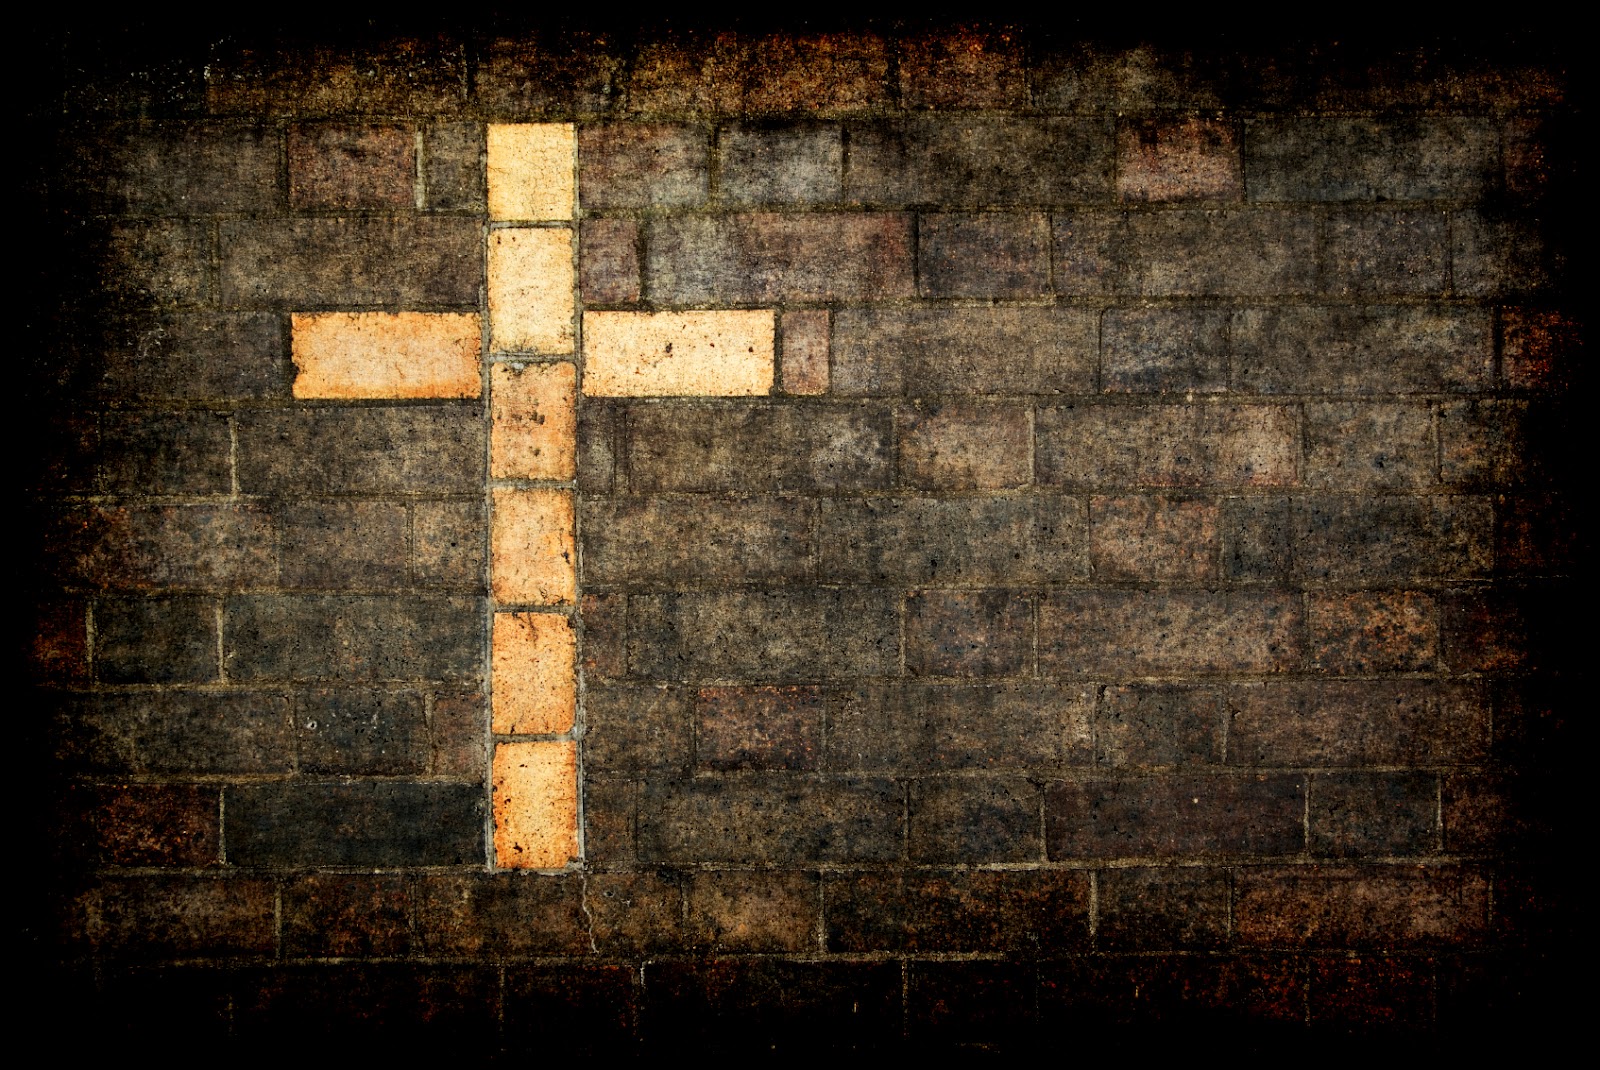 the cross the cross is the most recognizable symbol in